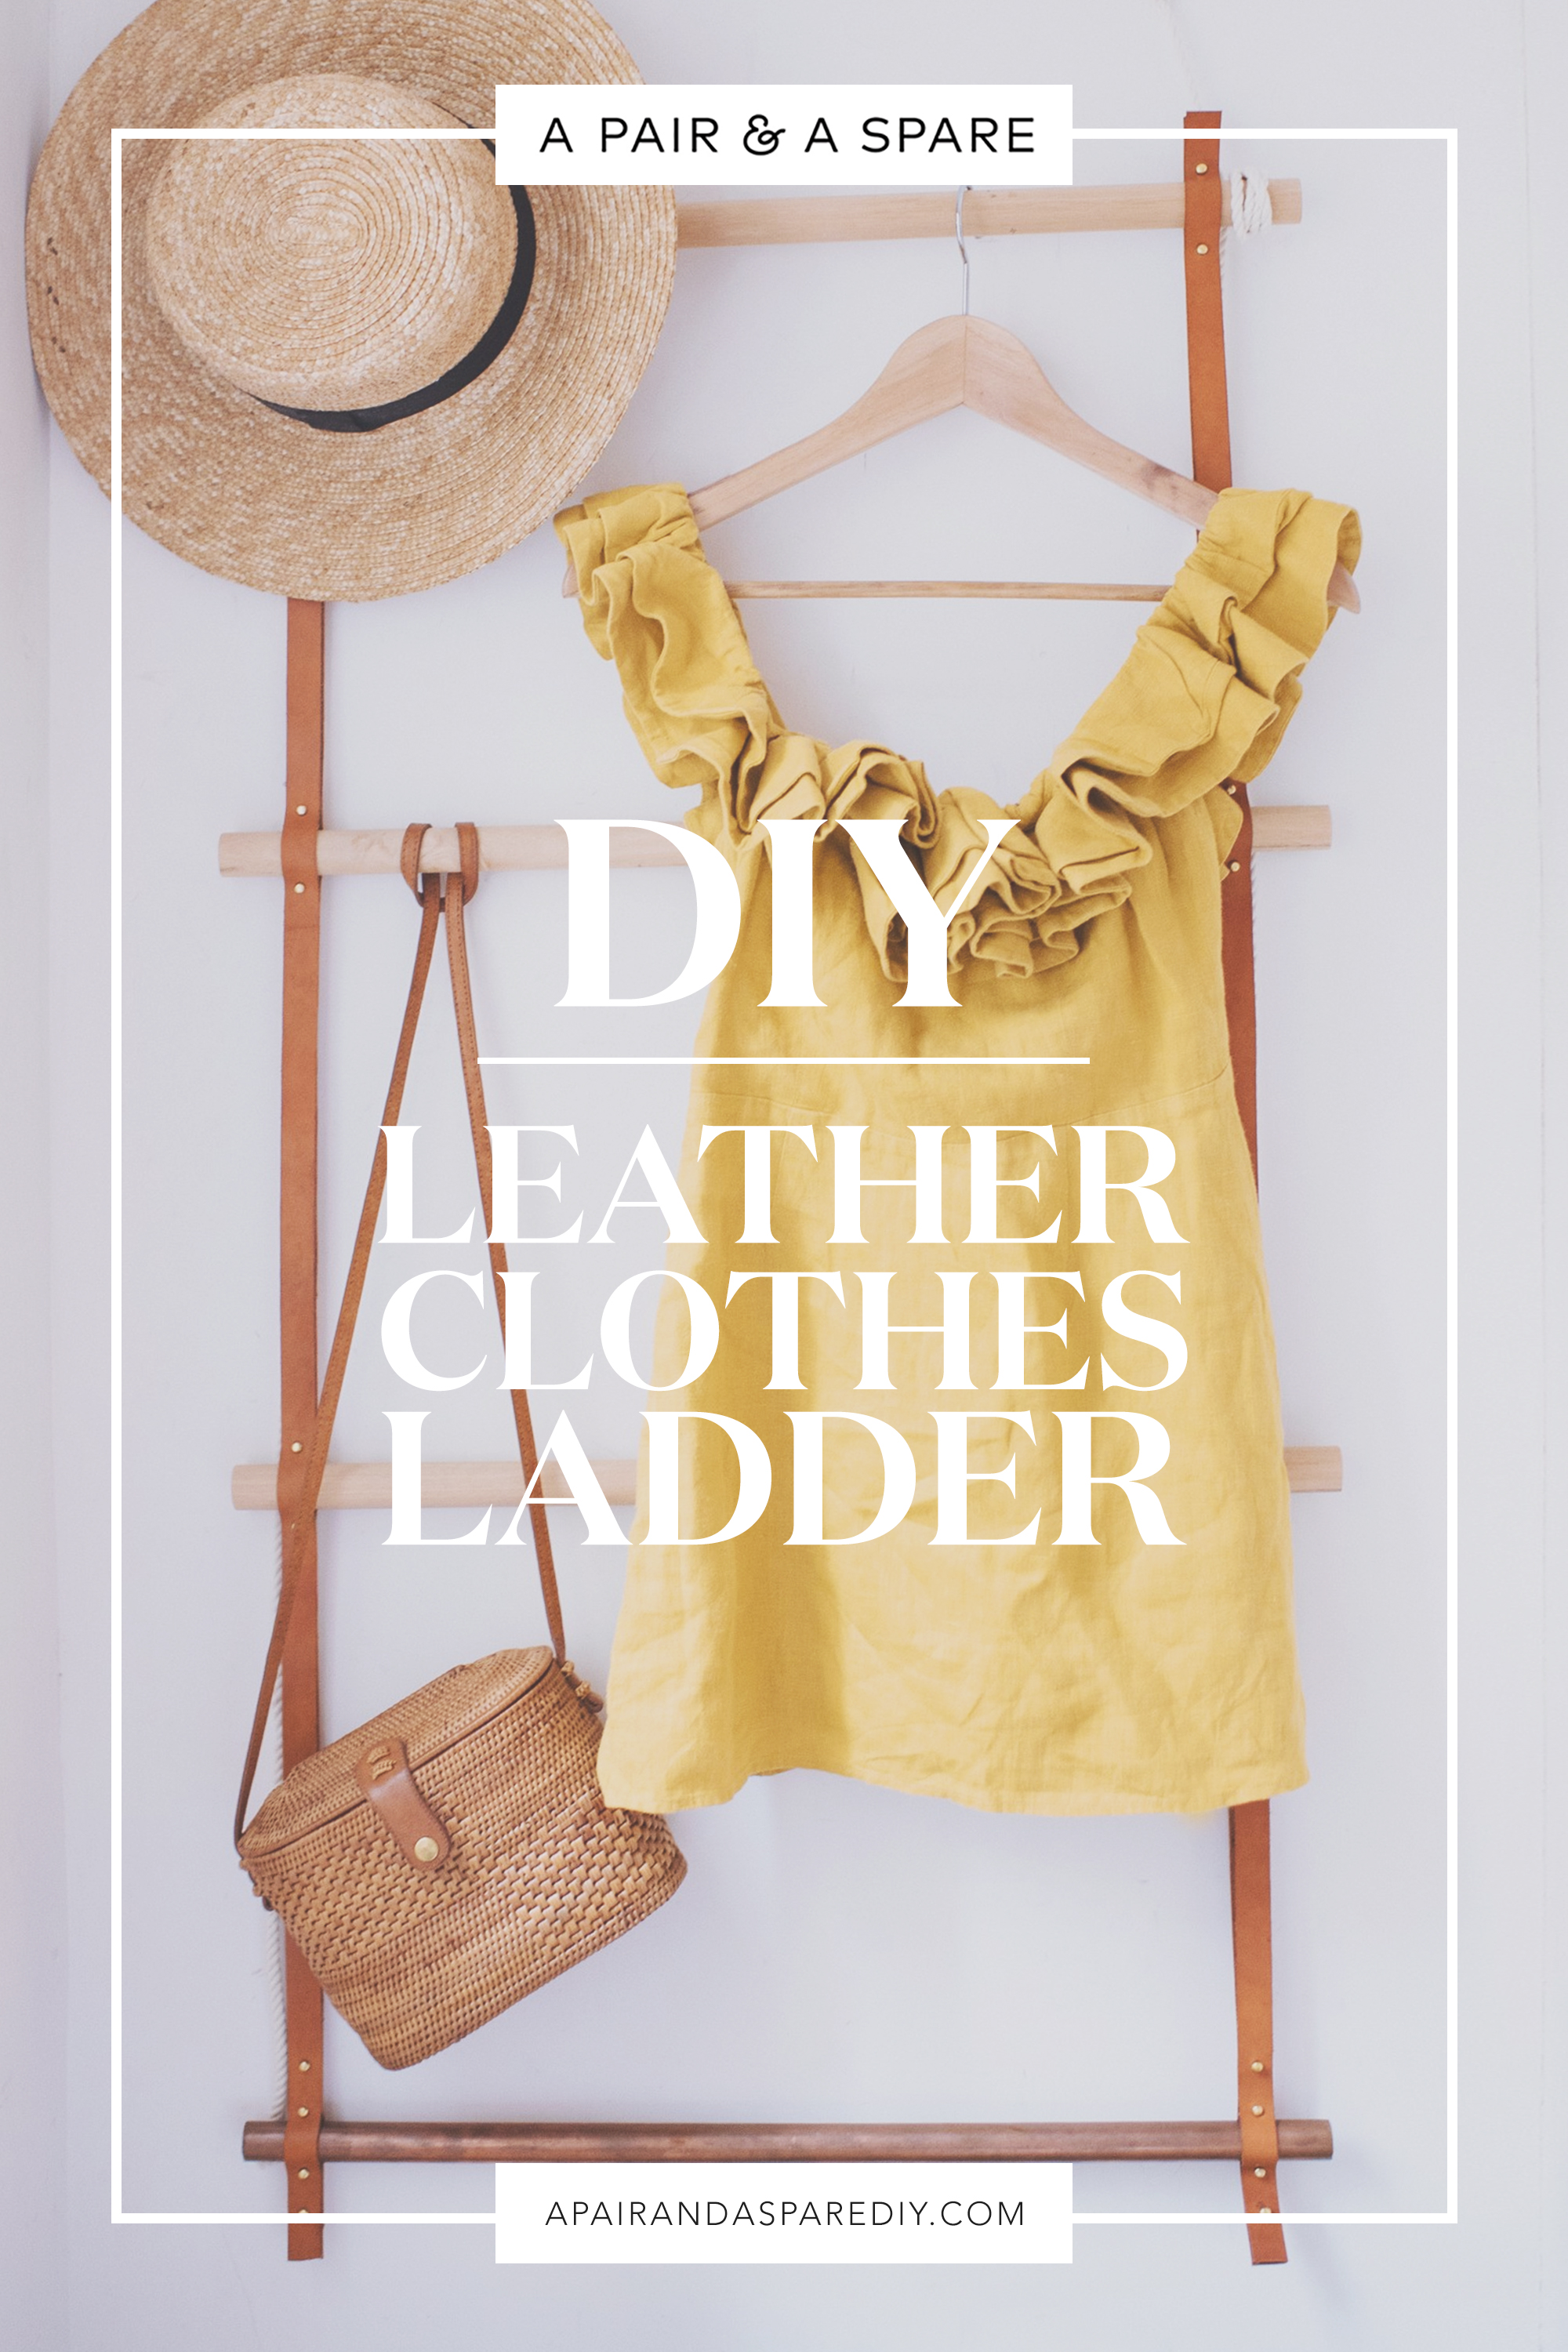 DIY Leather Clothes Ladder